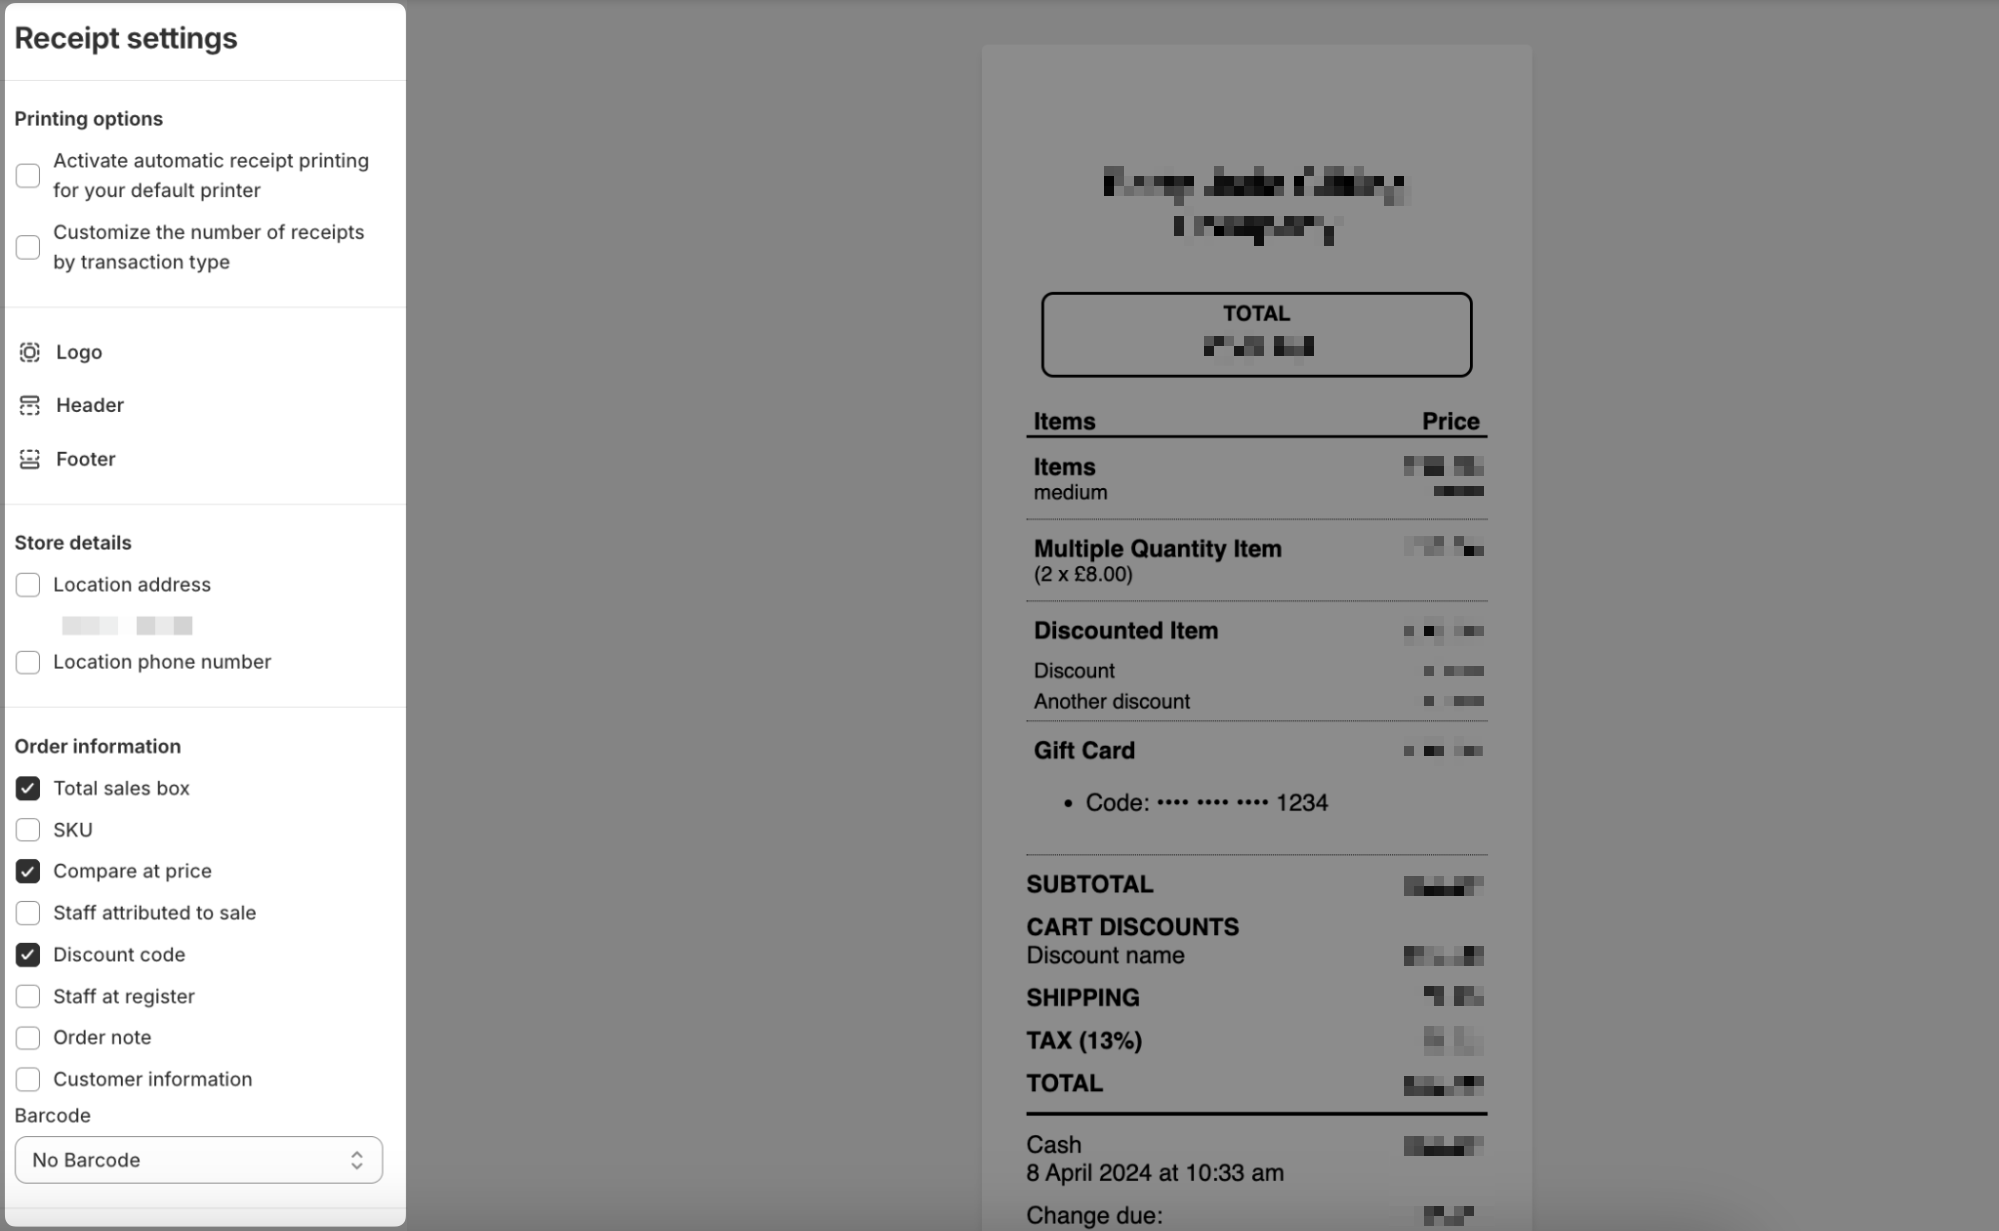 Receipt template showing the customization options in Shopify.